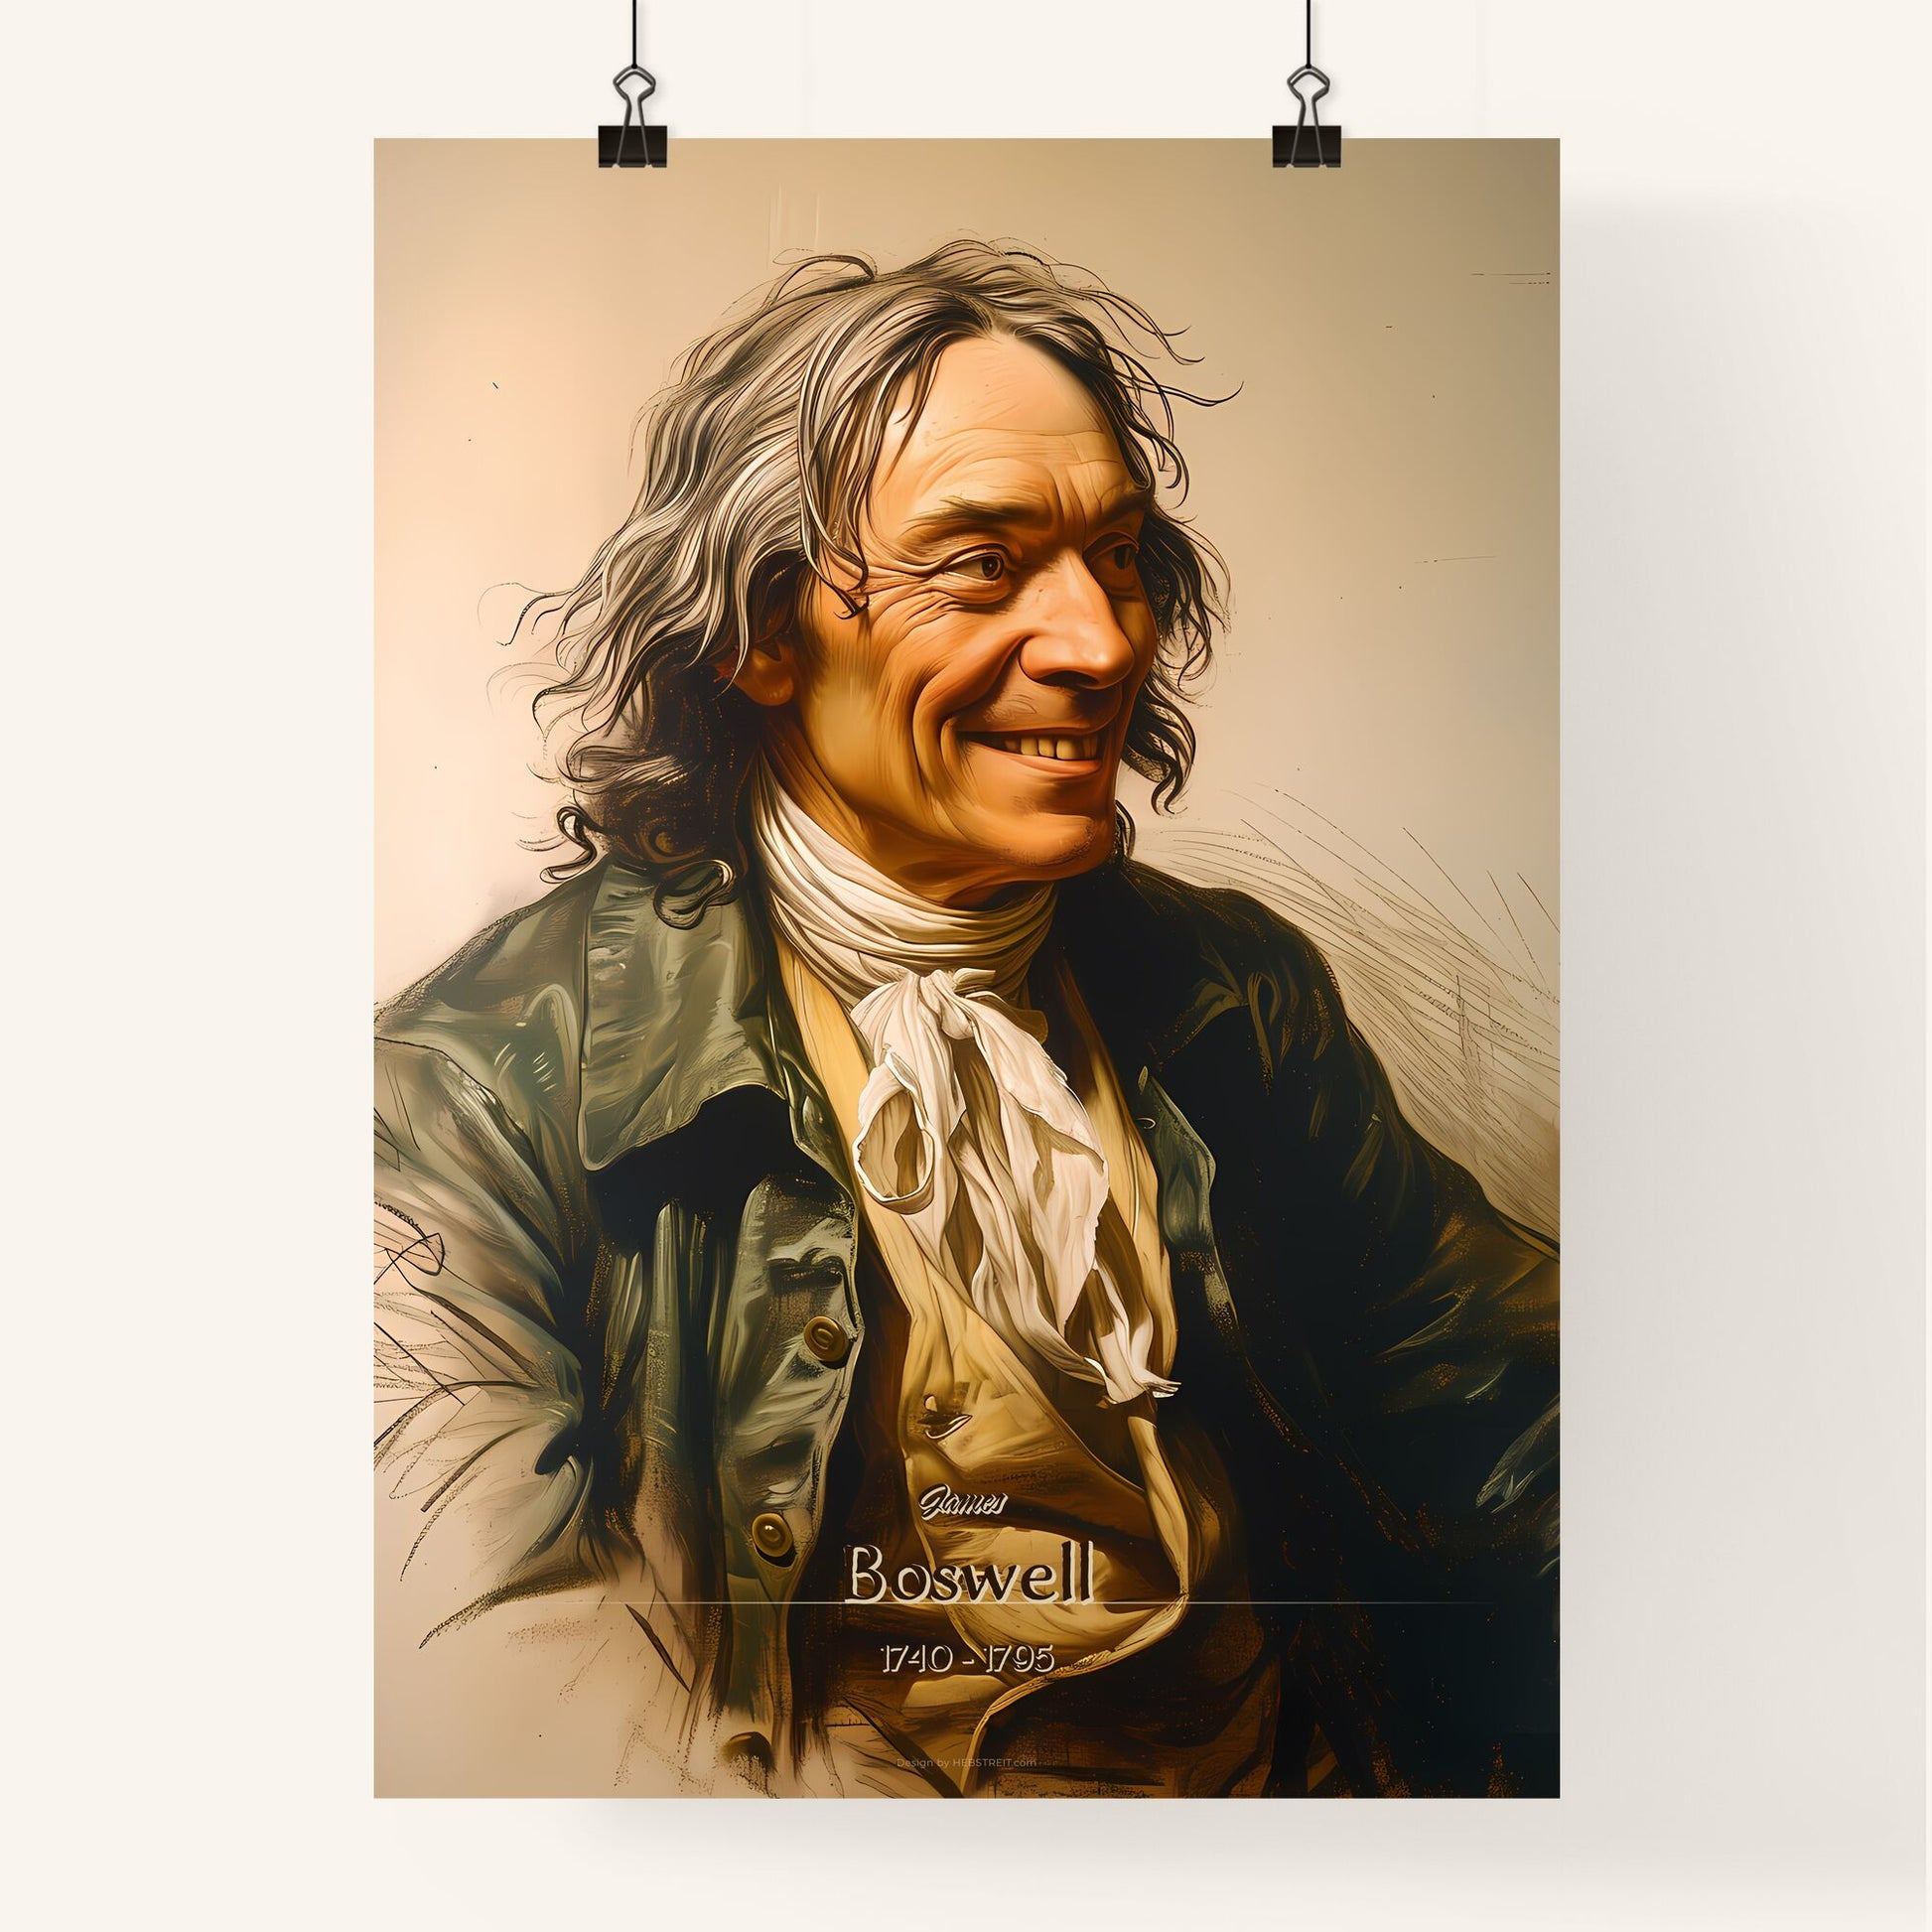 James, Boswell, 1740 - 1795, A Poster of a man with long hair and a scarf smiling Default Title